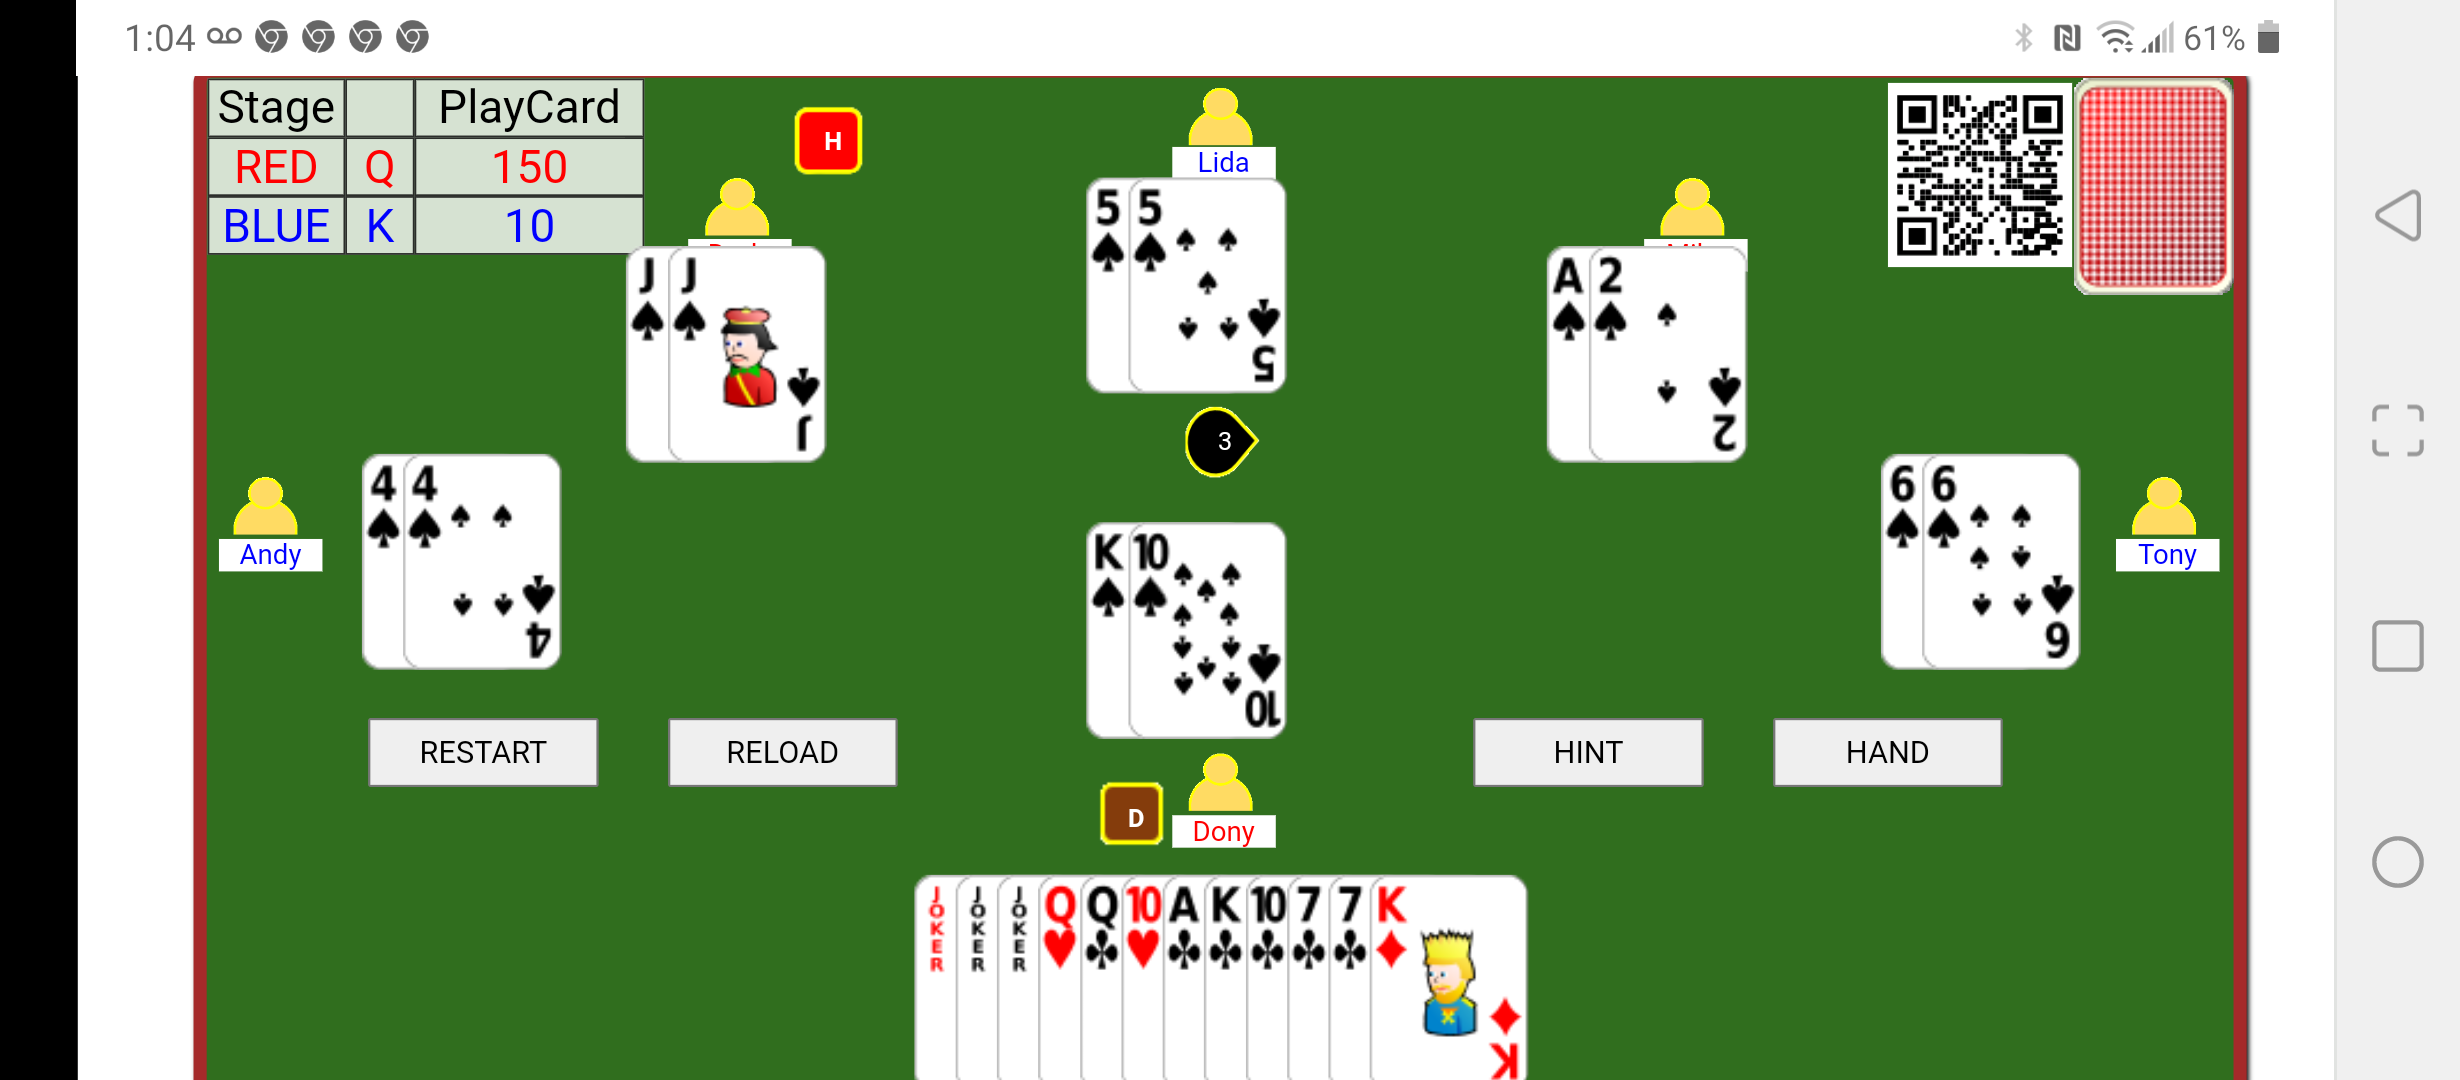 html5 tractor card game Screenshot_20220126-010402.png